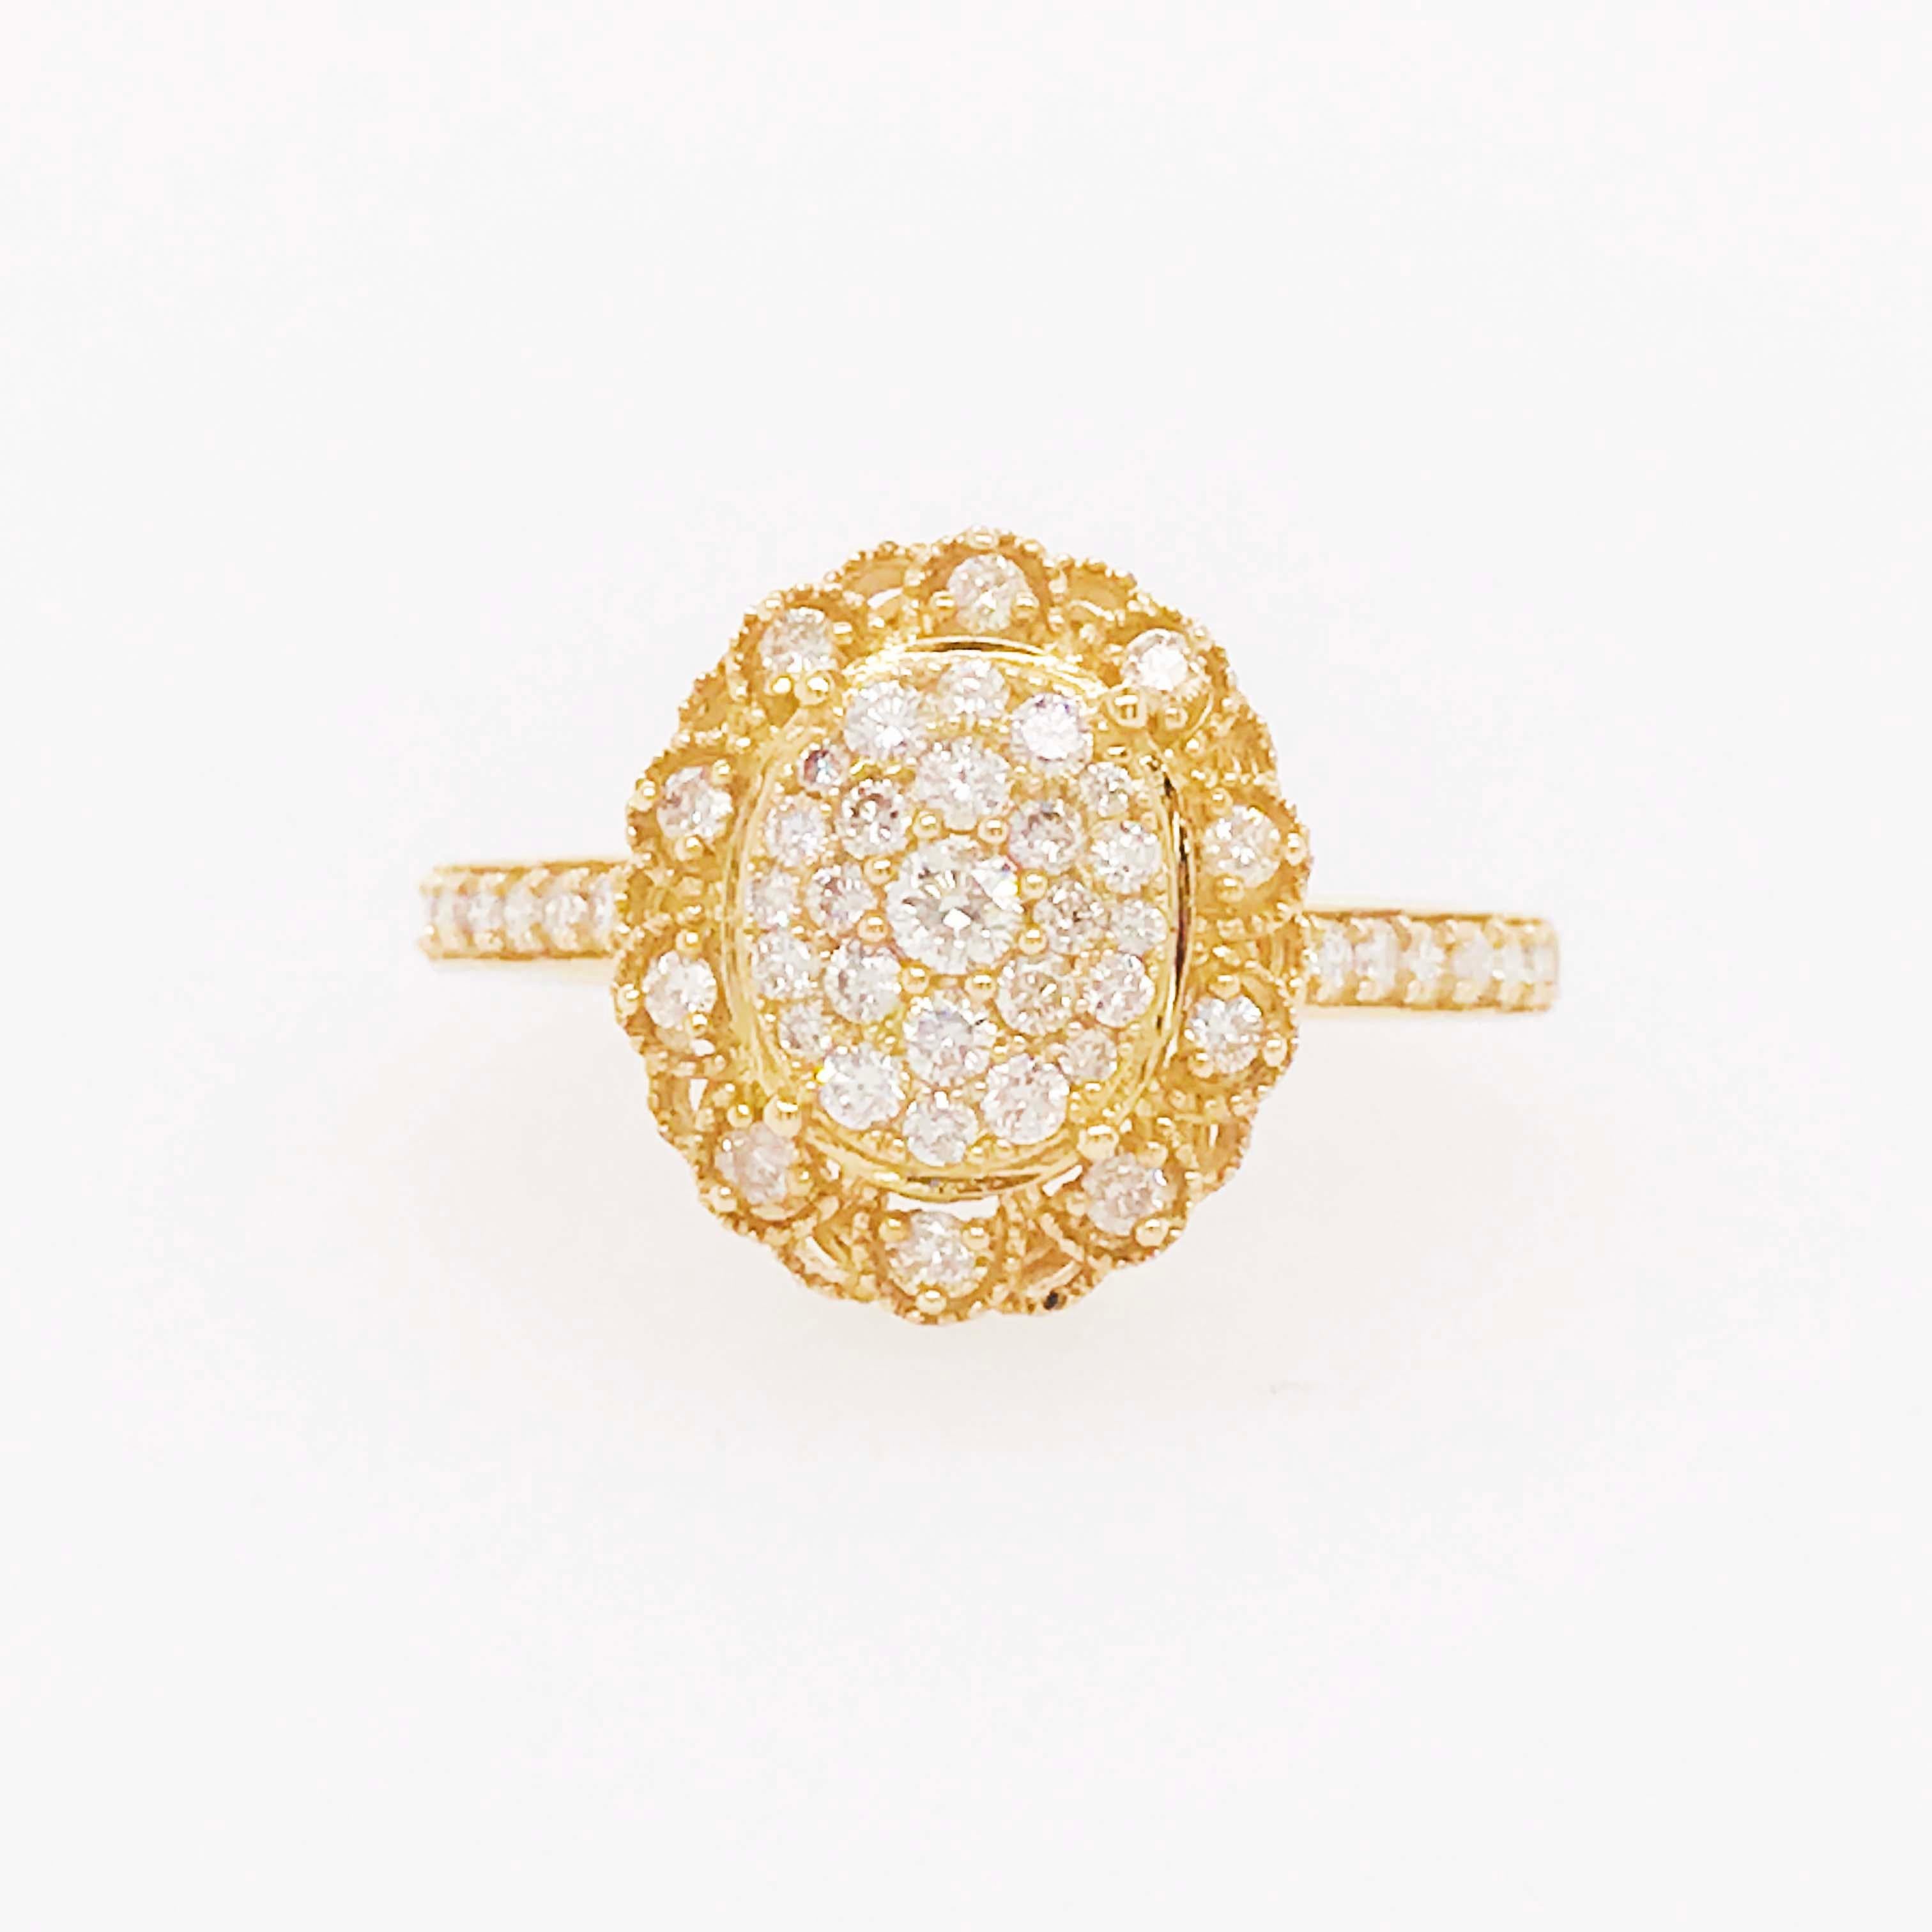 Women's Antique Inspired Oval Pave 1/2 Carat Diamond Engagement Ring in Yellow Gold